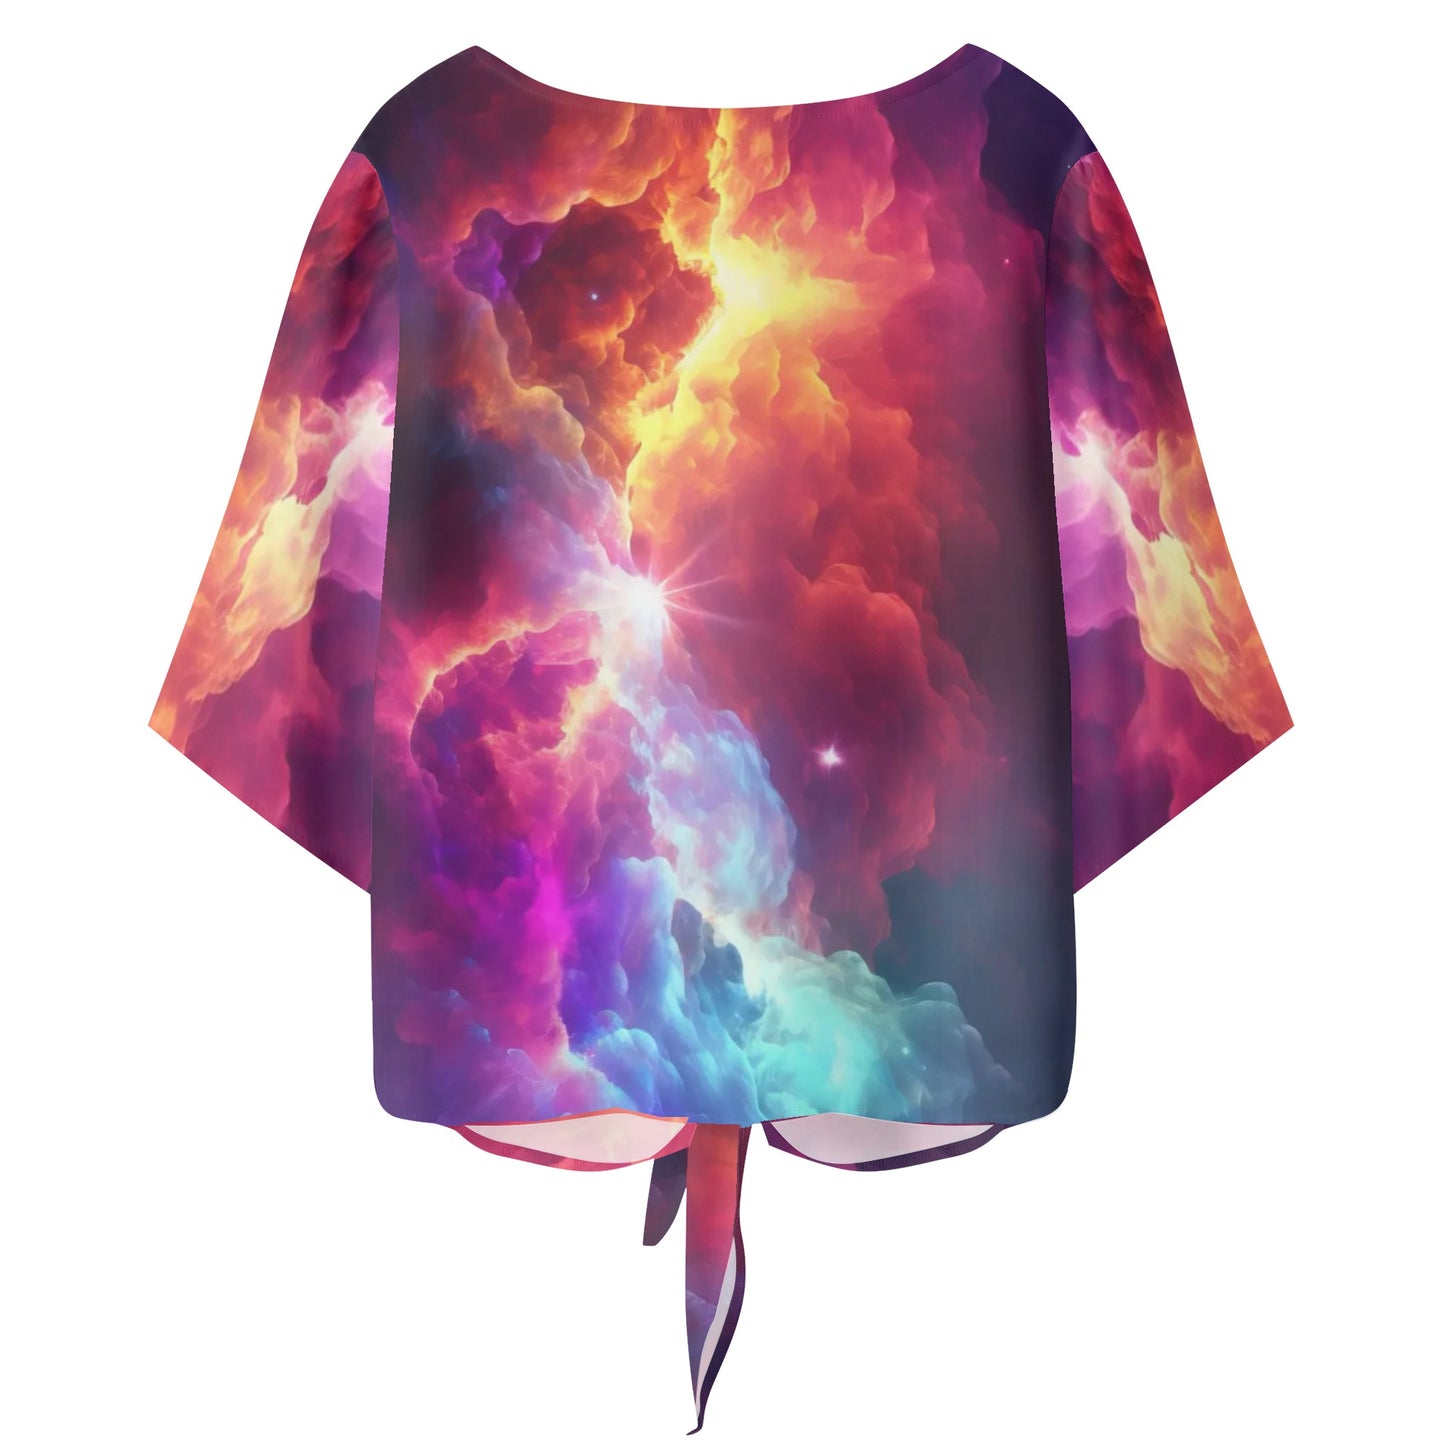 Out of this World- Women‘s’ V-neck Tie Front Knot Chiffon Blouse